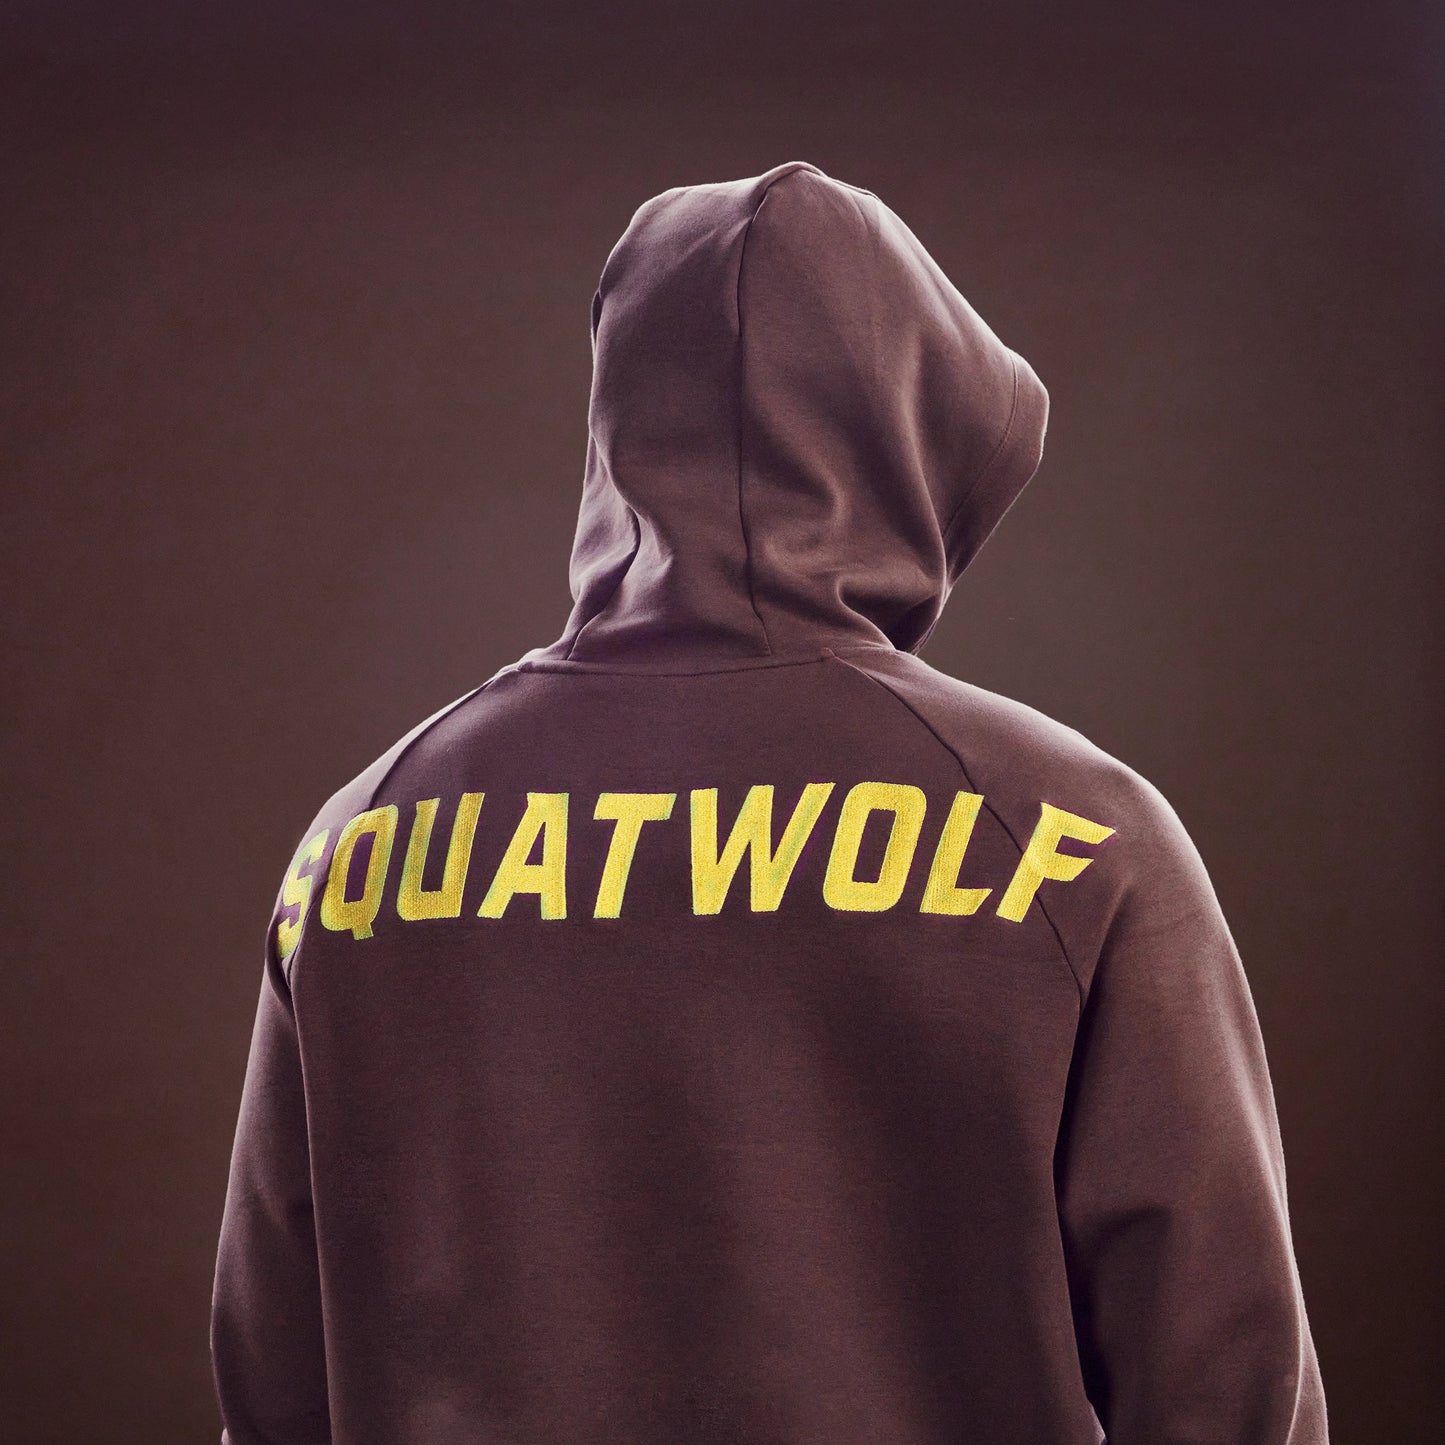 squatwolf-gym-wear-core-level-up-hoodie-fudge-workout-hoodies-for-men